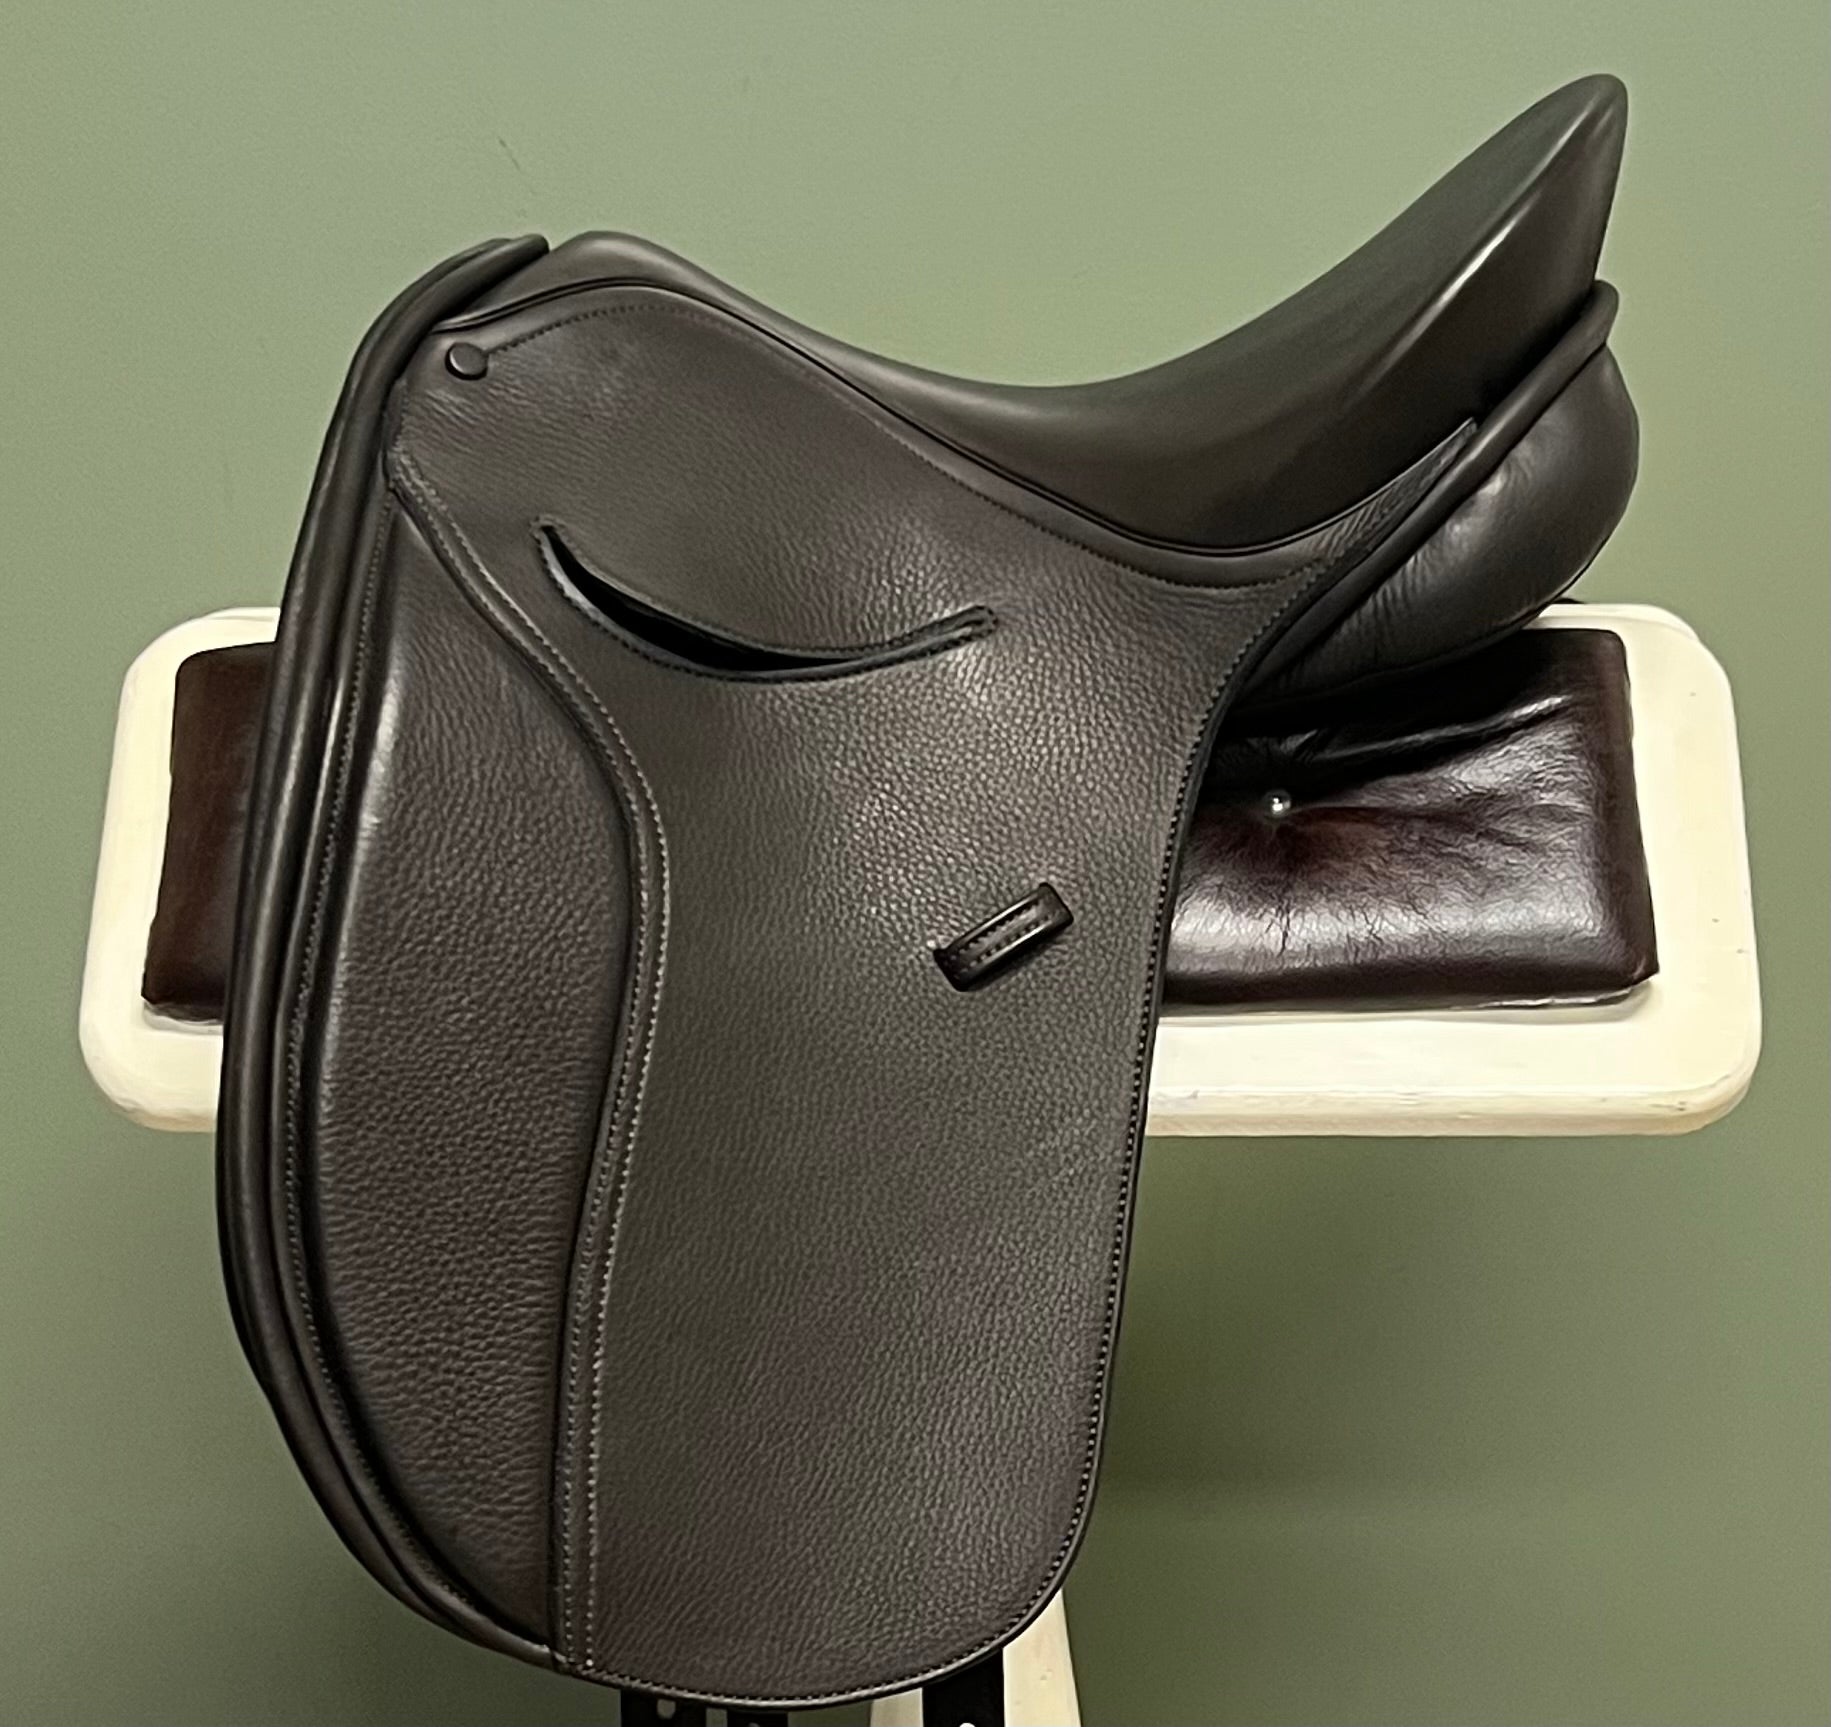 STOCK CLEARANCE PH Royal 2 Saddle Dark Havana with covered buttons Size 16"